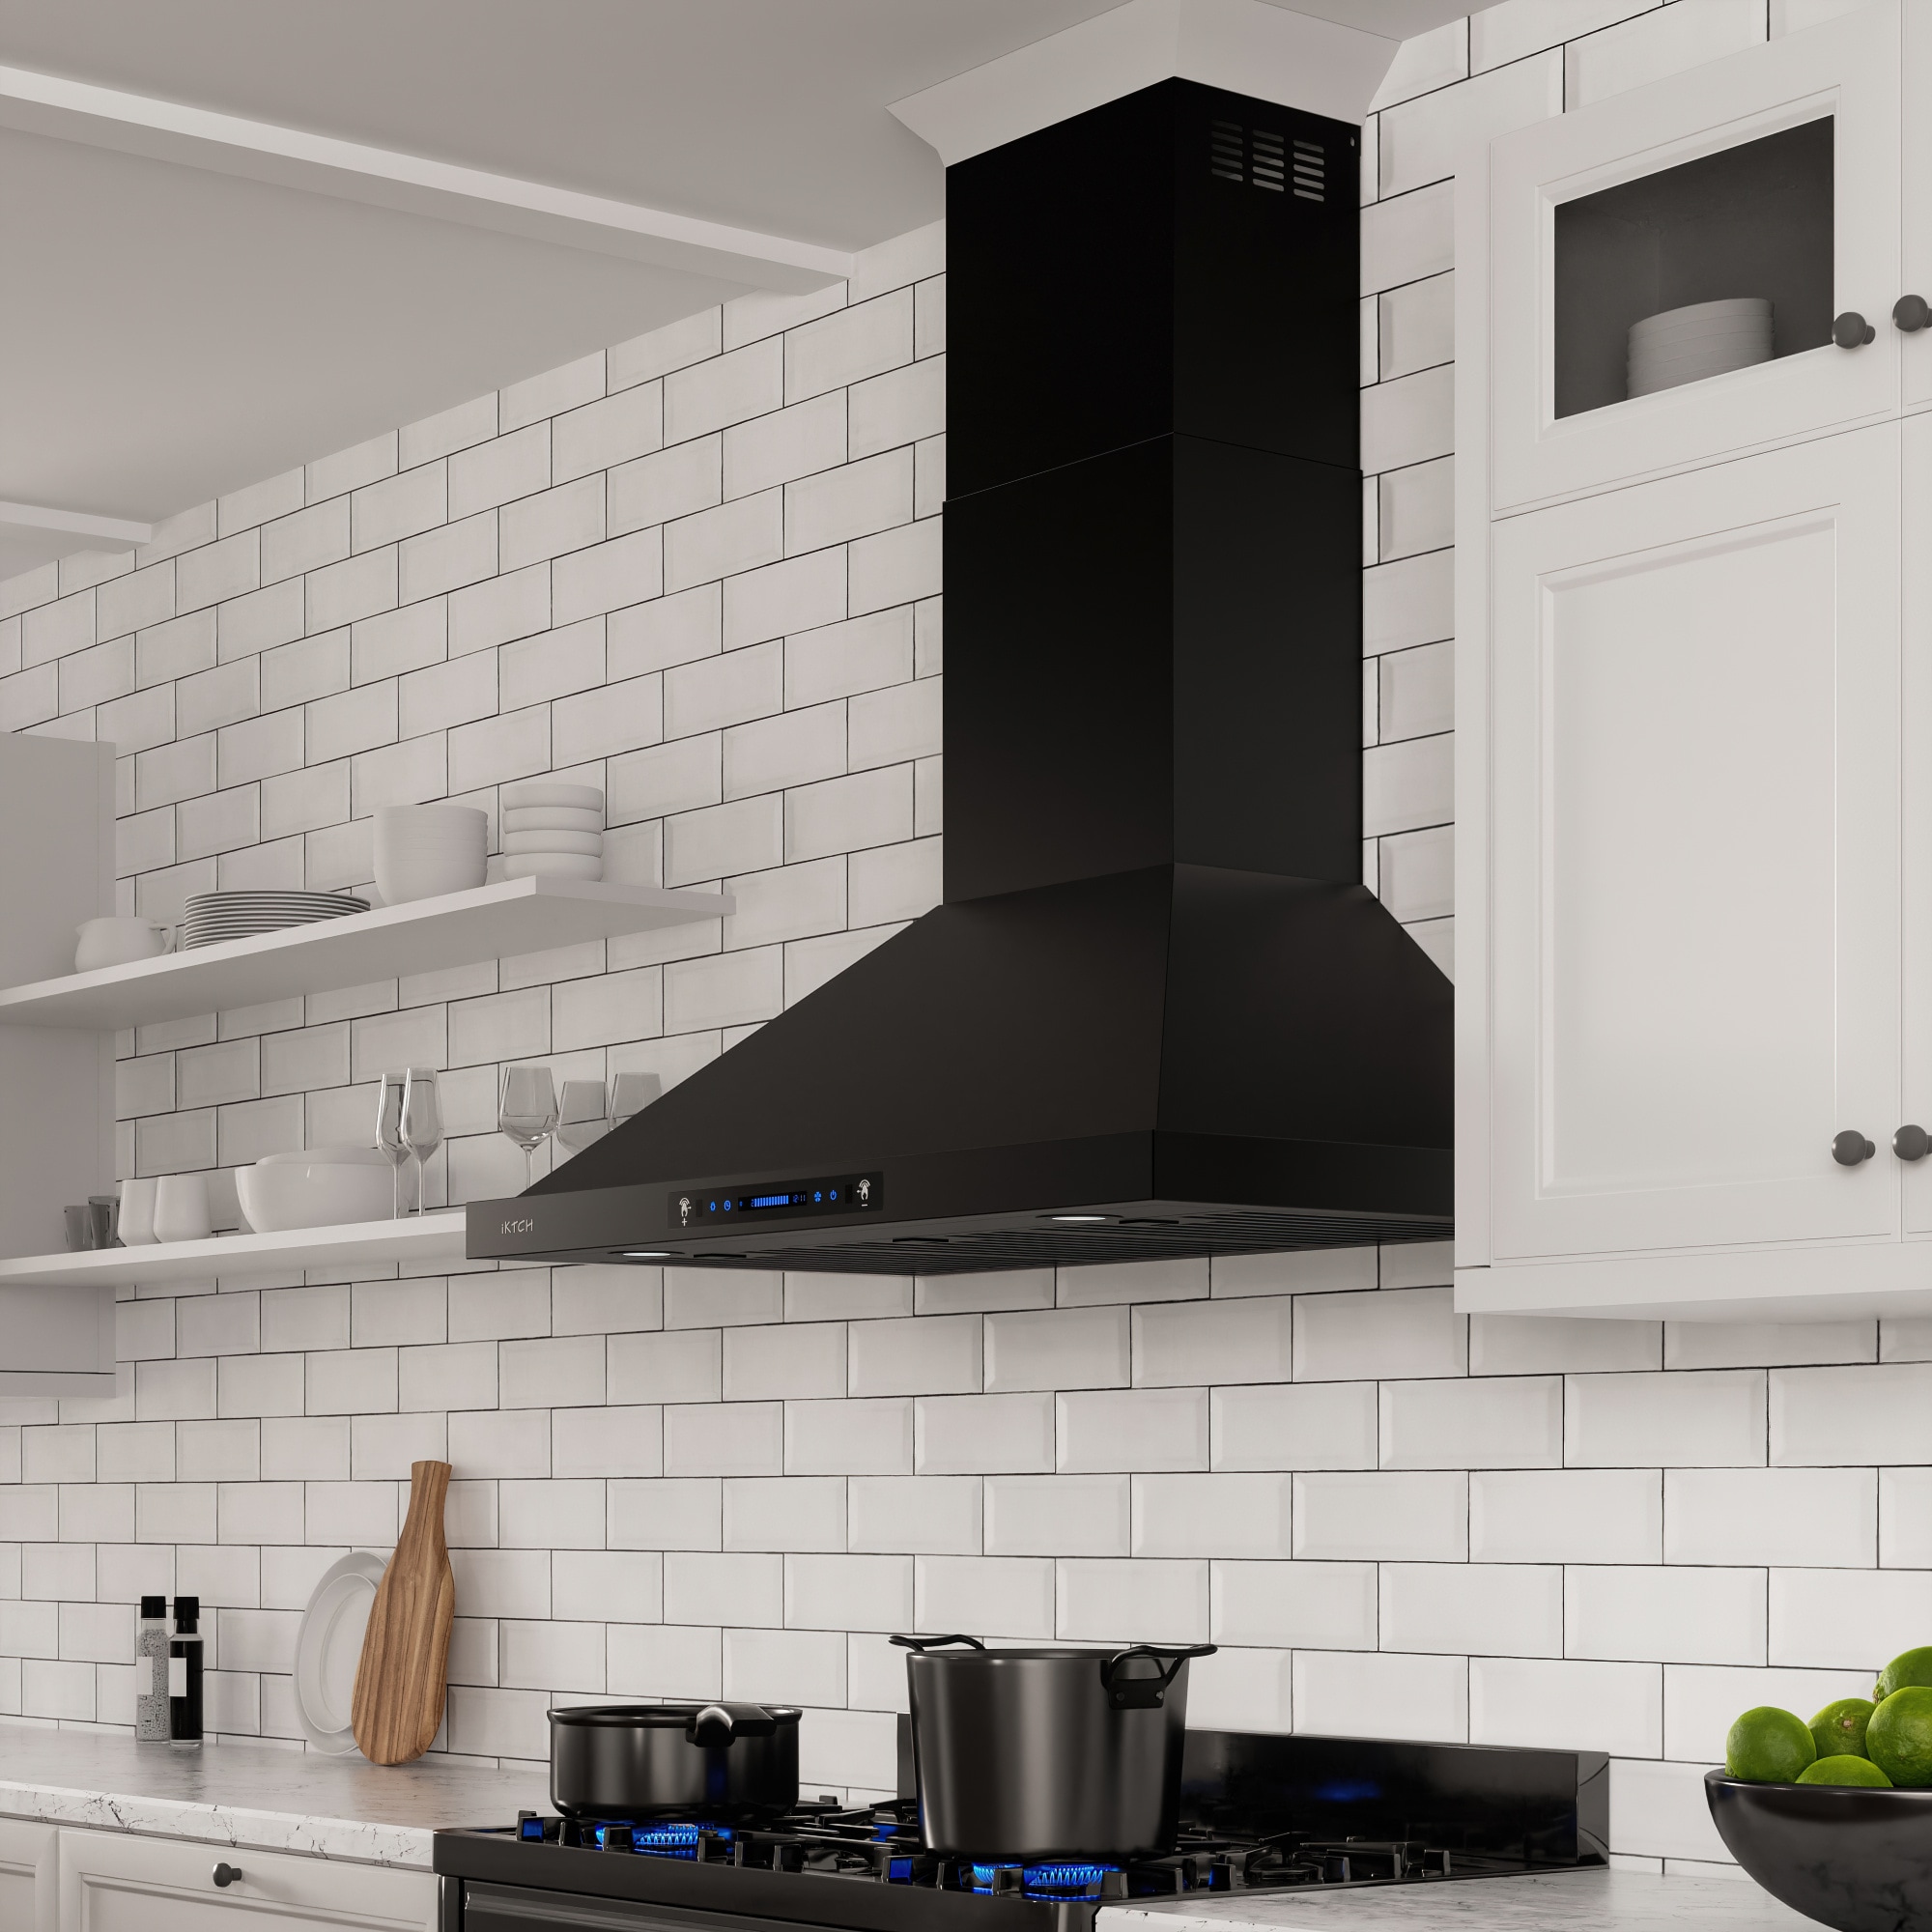 IKTCH 30 inch Wall Mount Range Hood 900 CFM Ducted/Ductless Convertible,  Kitchen Chimney Vent Stainless Steel